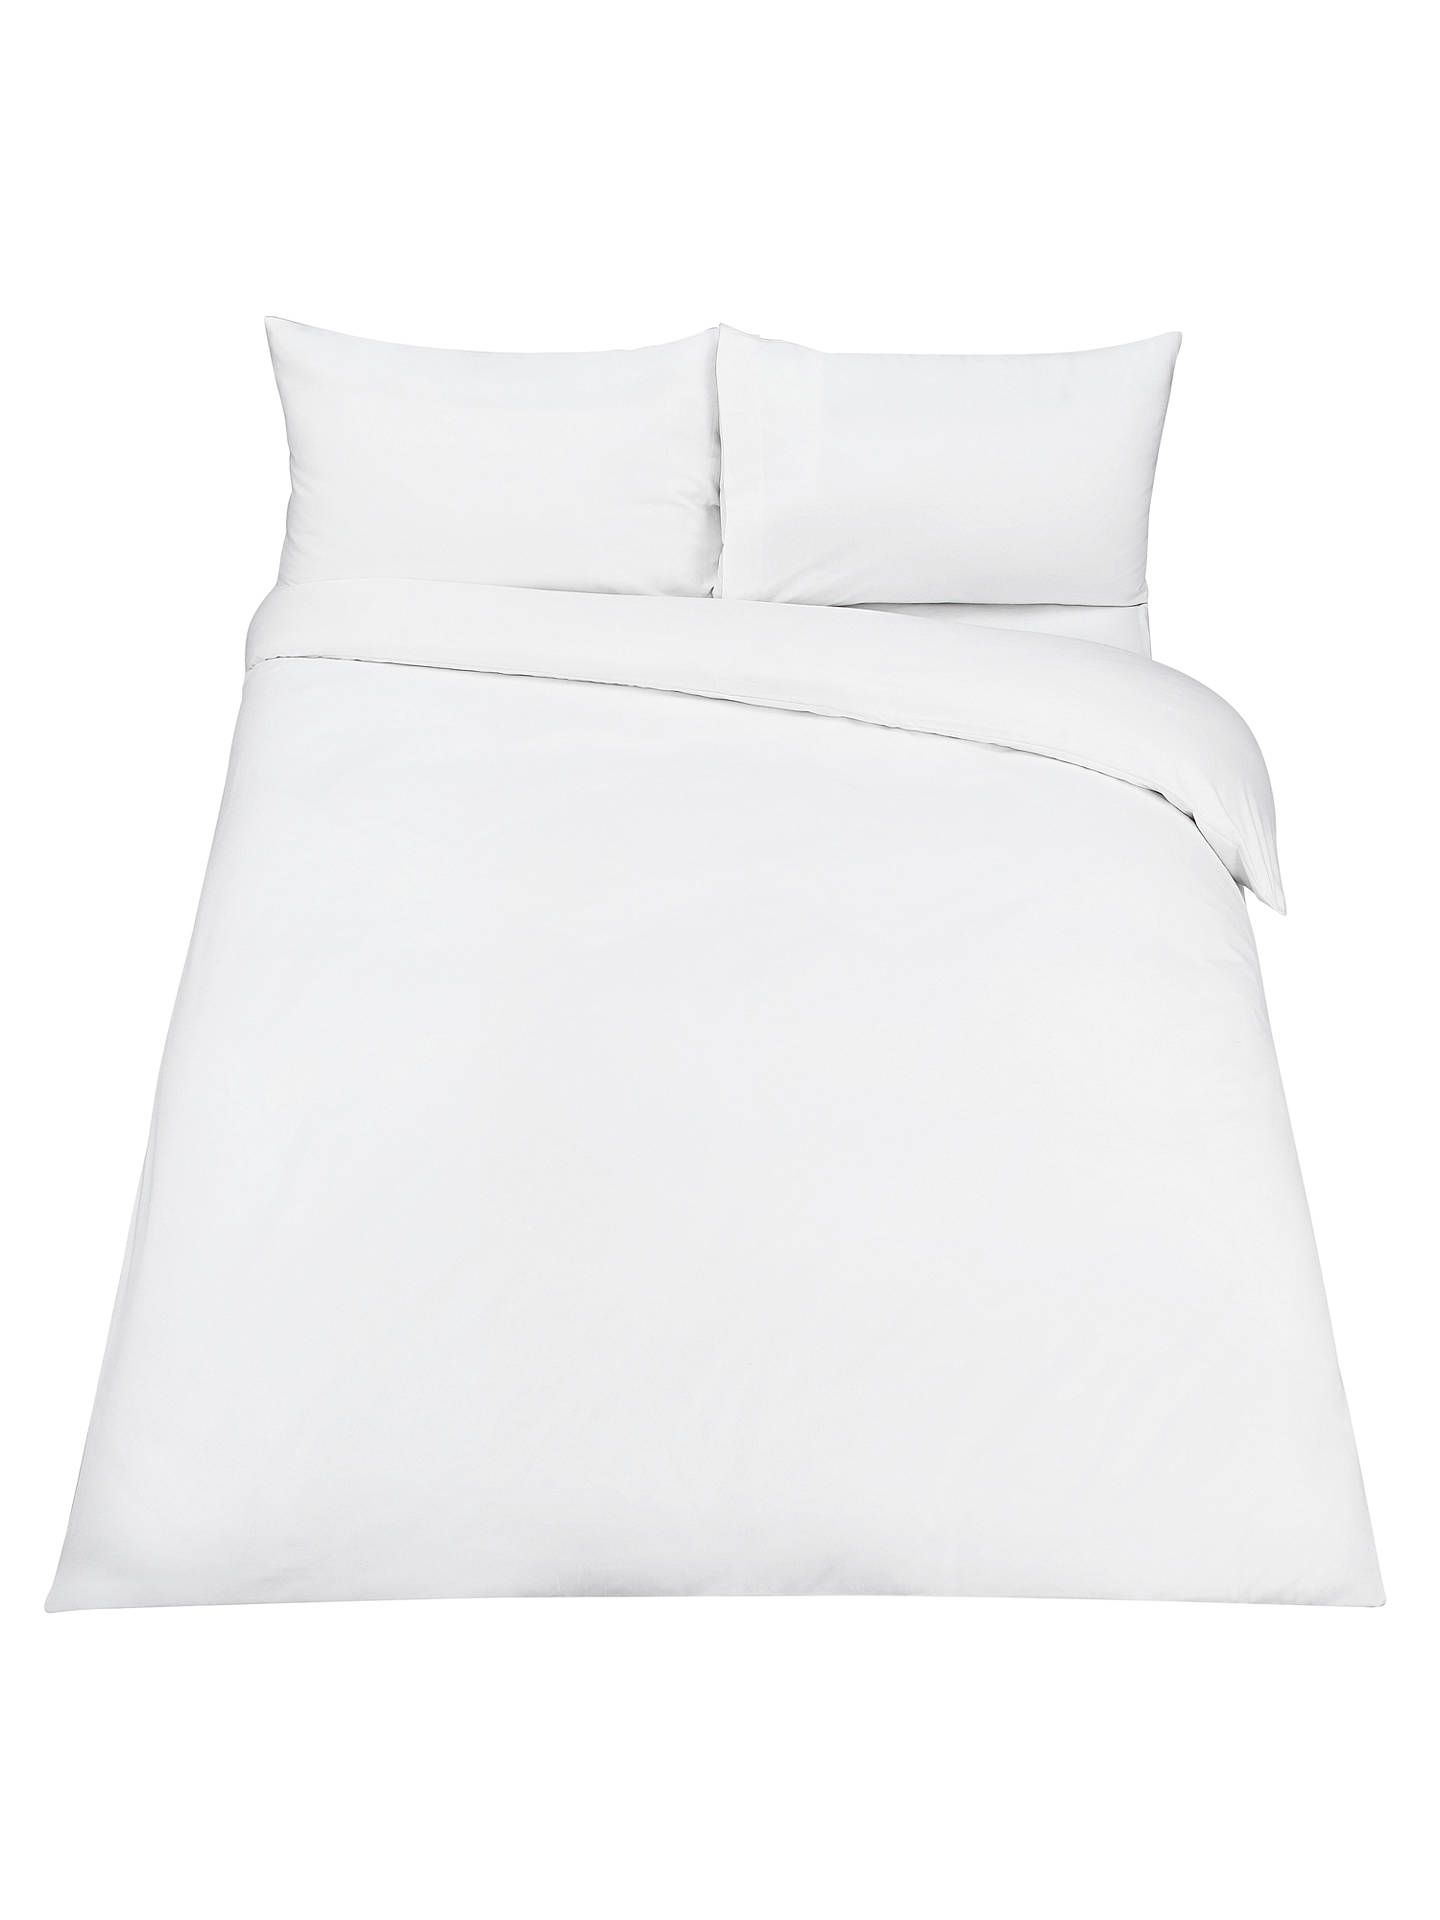 John Lewis Bedding Best Selling Bedroom Items For A Perfect